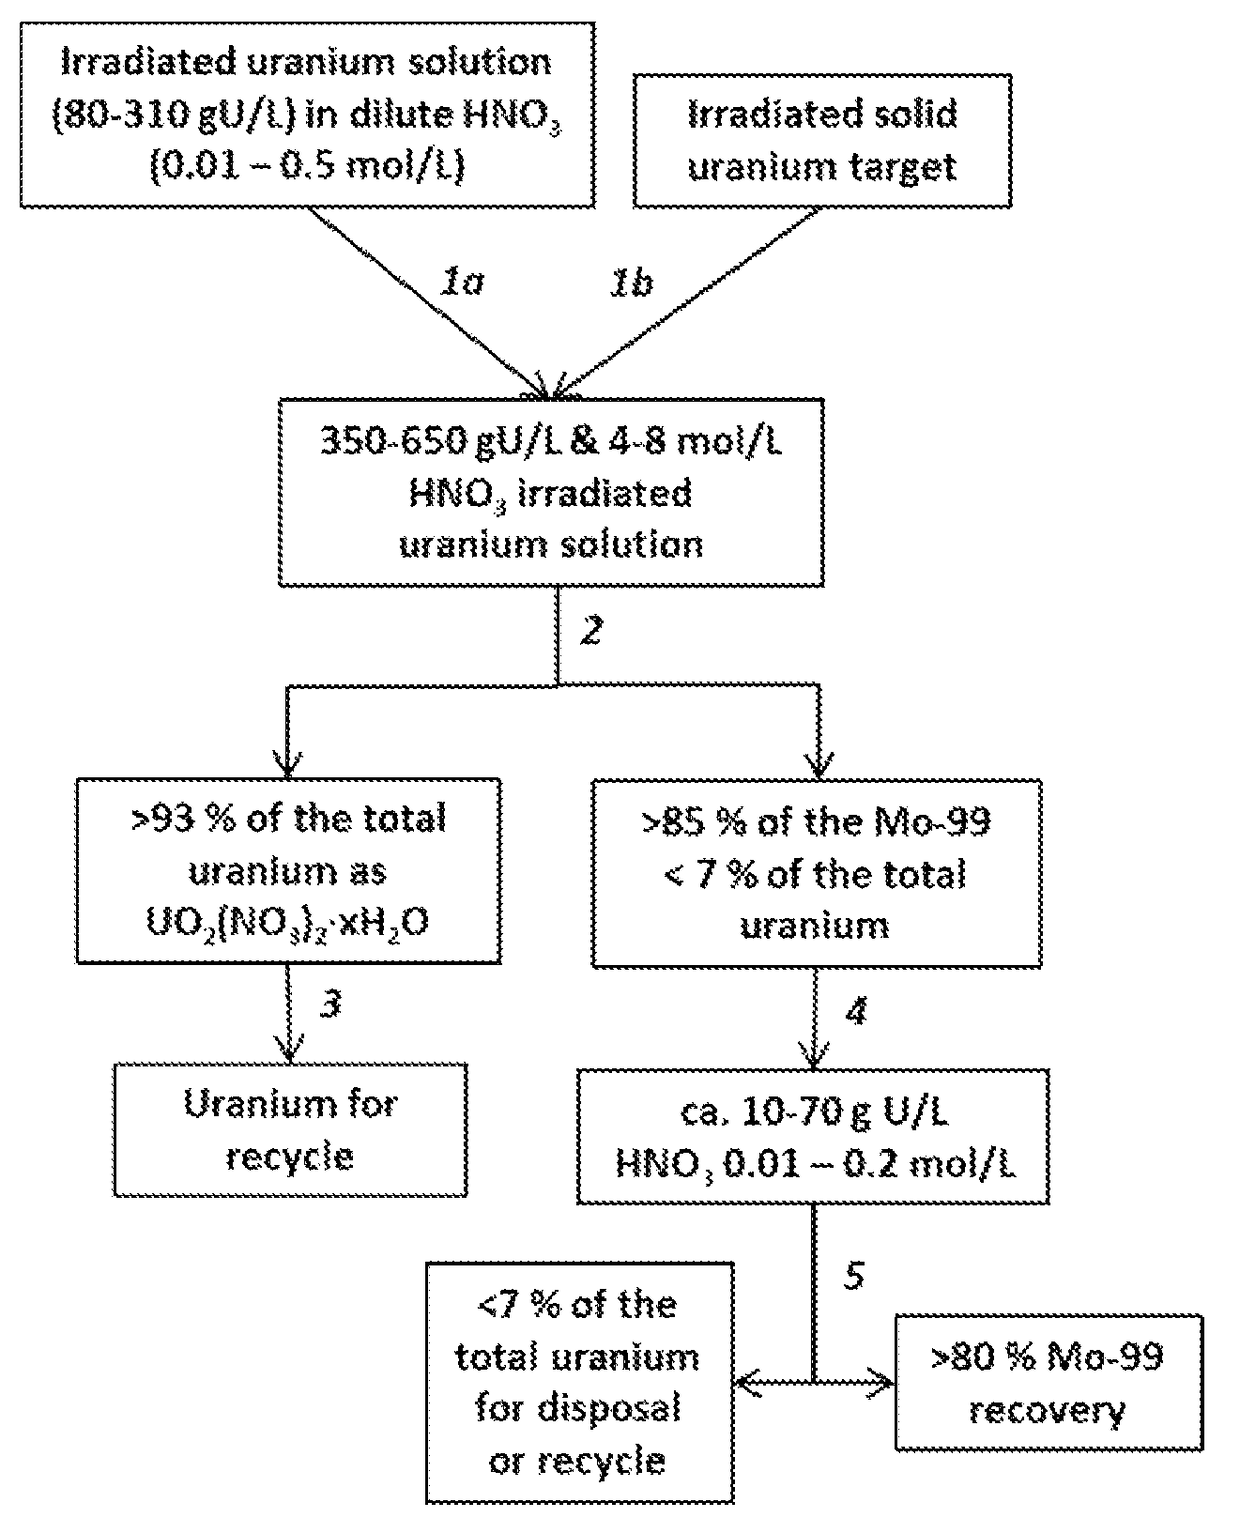 Recovering and recycling uranium used for production of molybdenum-99